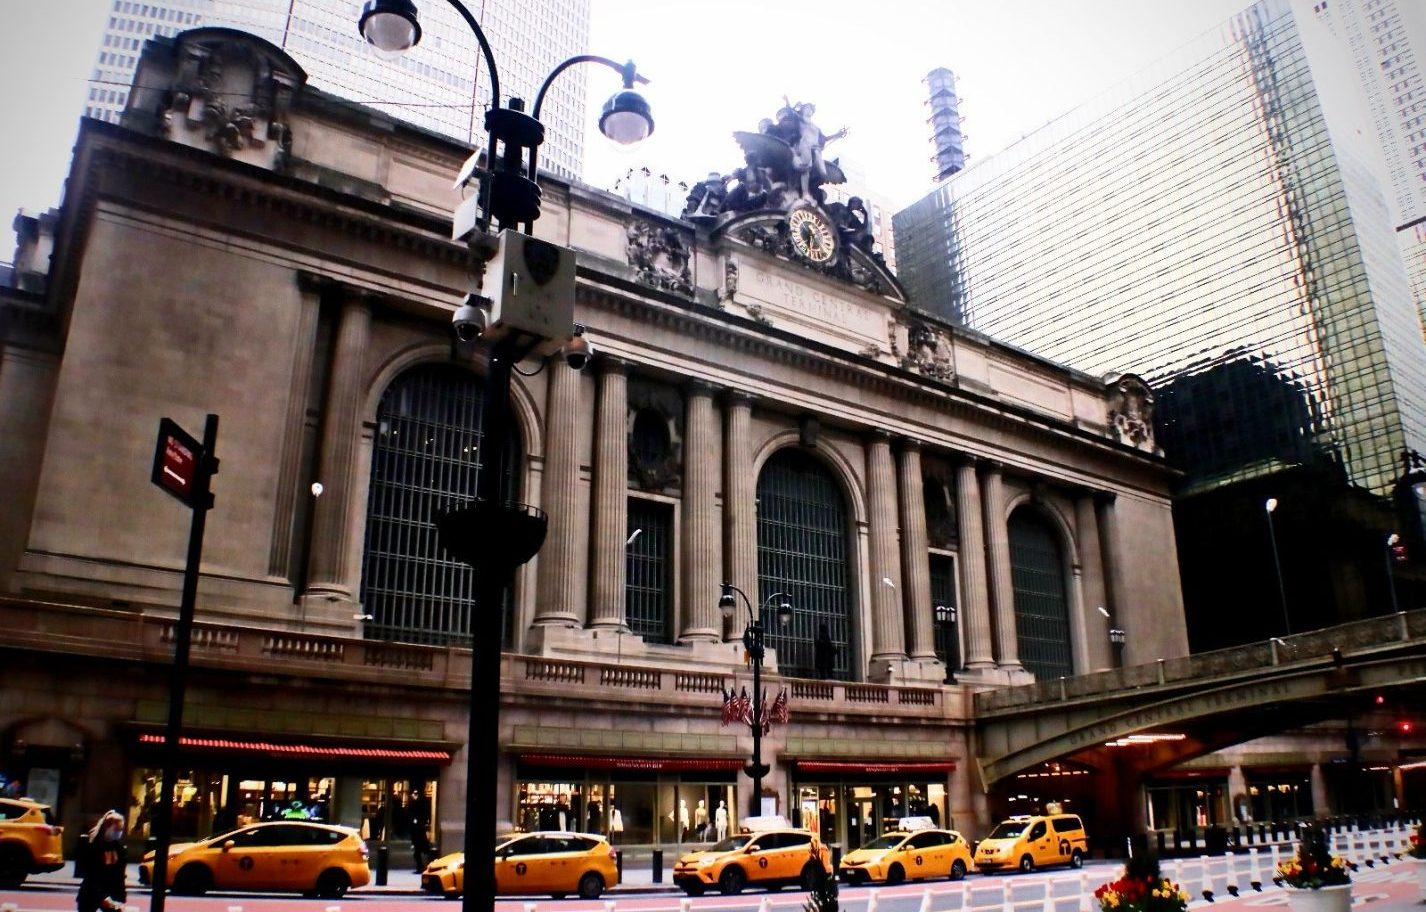 Grand Central Station,NYC, March 2020, during COVID. As you can see, there are just the taxi cabs and no inhabitants, which is very rare for New York City.